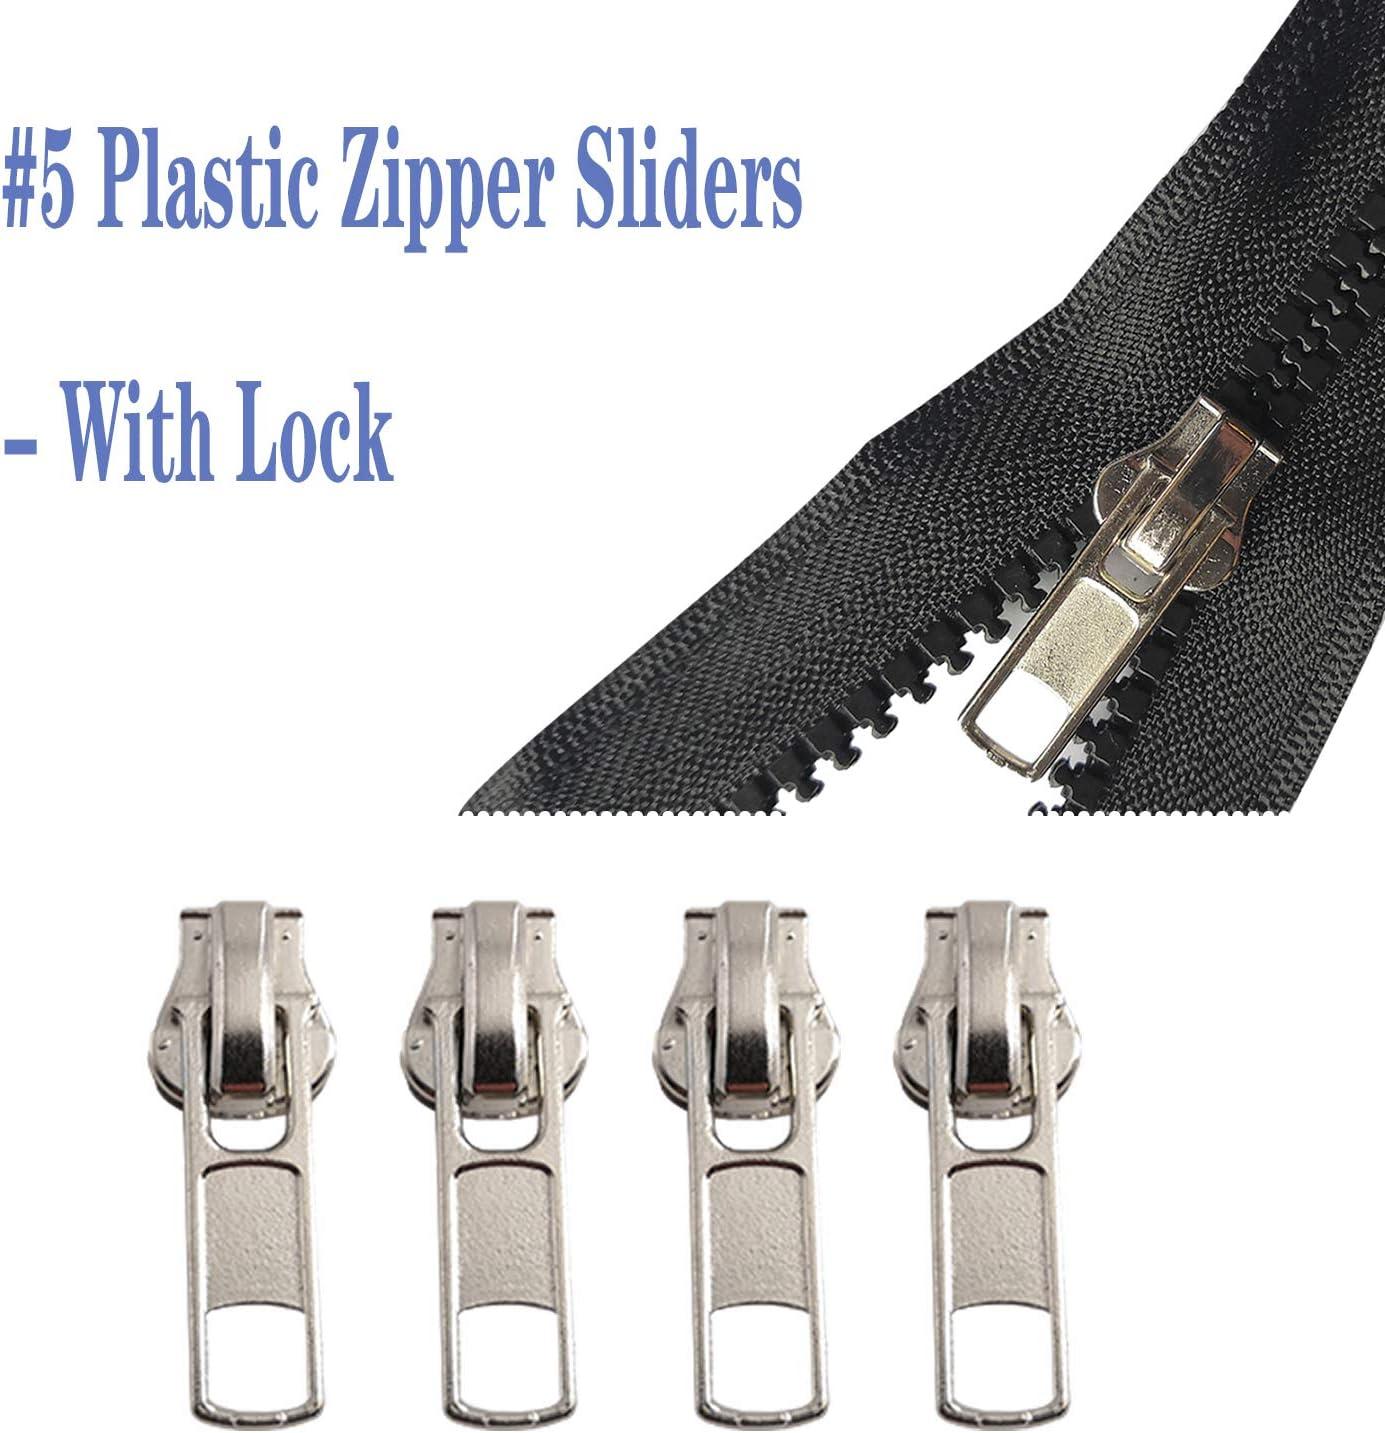 Meikeer 12 Pieces 5 Zipper Slider Repair Kits Black Bronze and Silver Zipper  Sliders Zipper Pull Replacement for Metal Plastic and Nylon Coil Jacket  Zippers